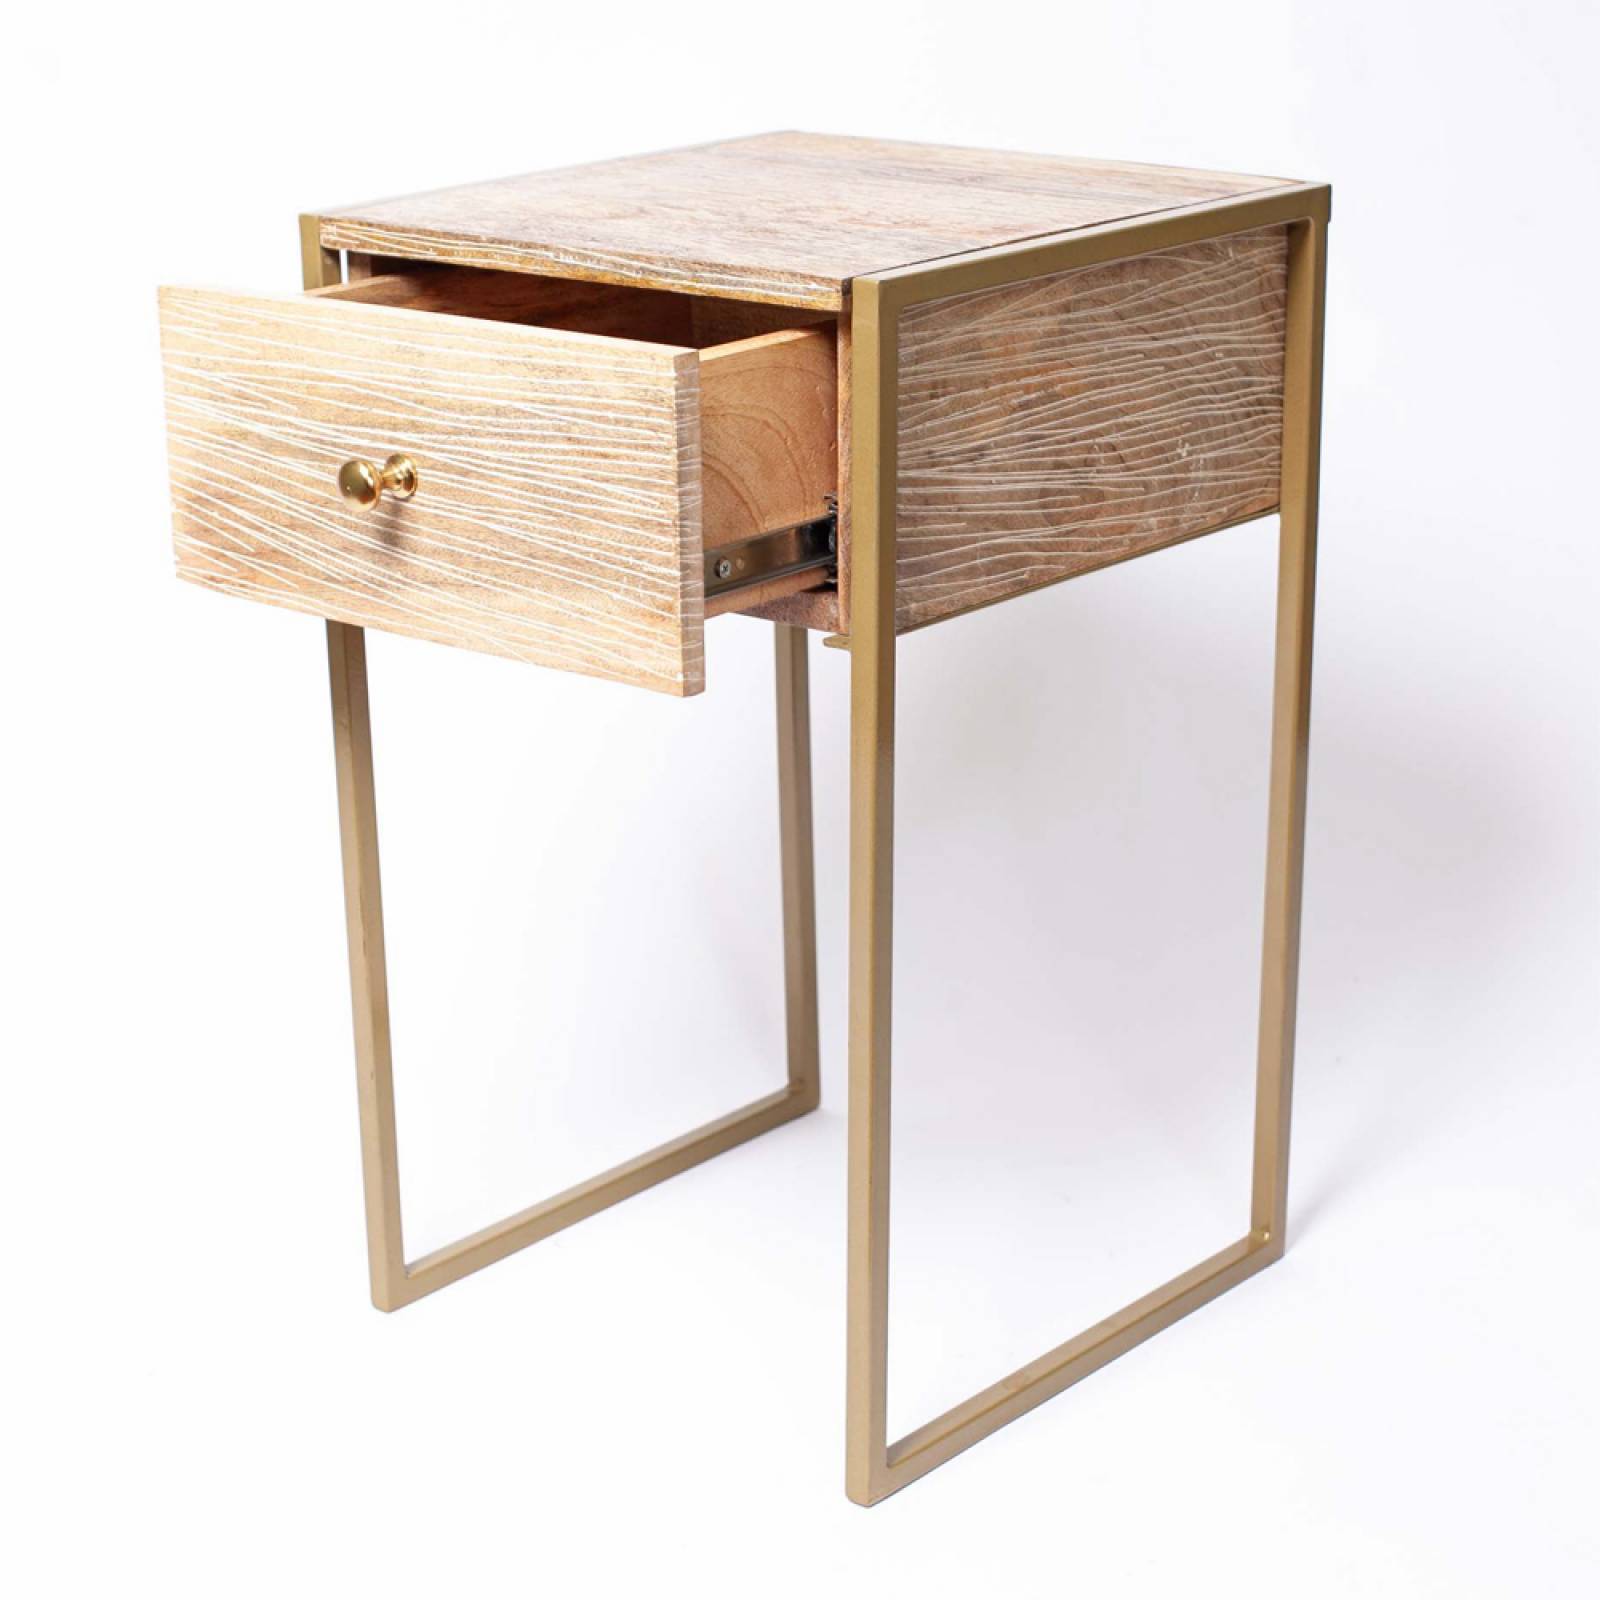 Light Wooden Bedside Table With Brass Frame & Drawer thumbnails